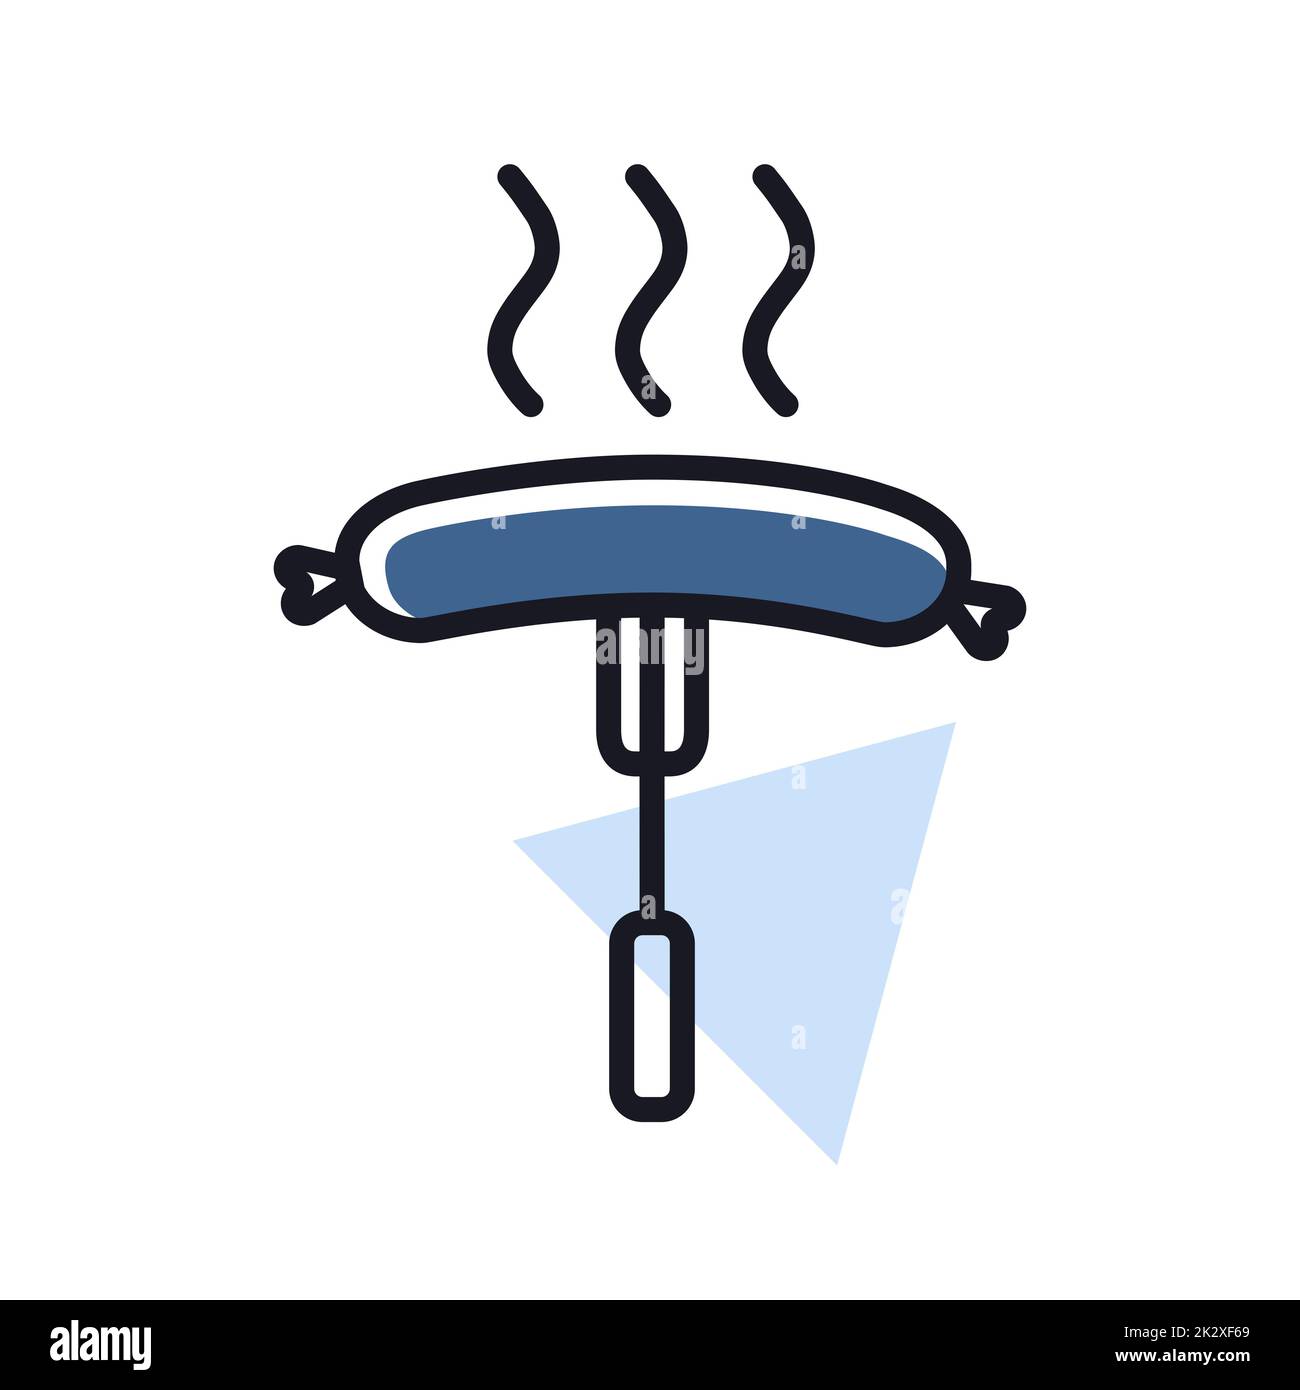 Sausage fork vector icon. Fast food sign Stock Photo